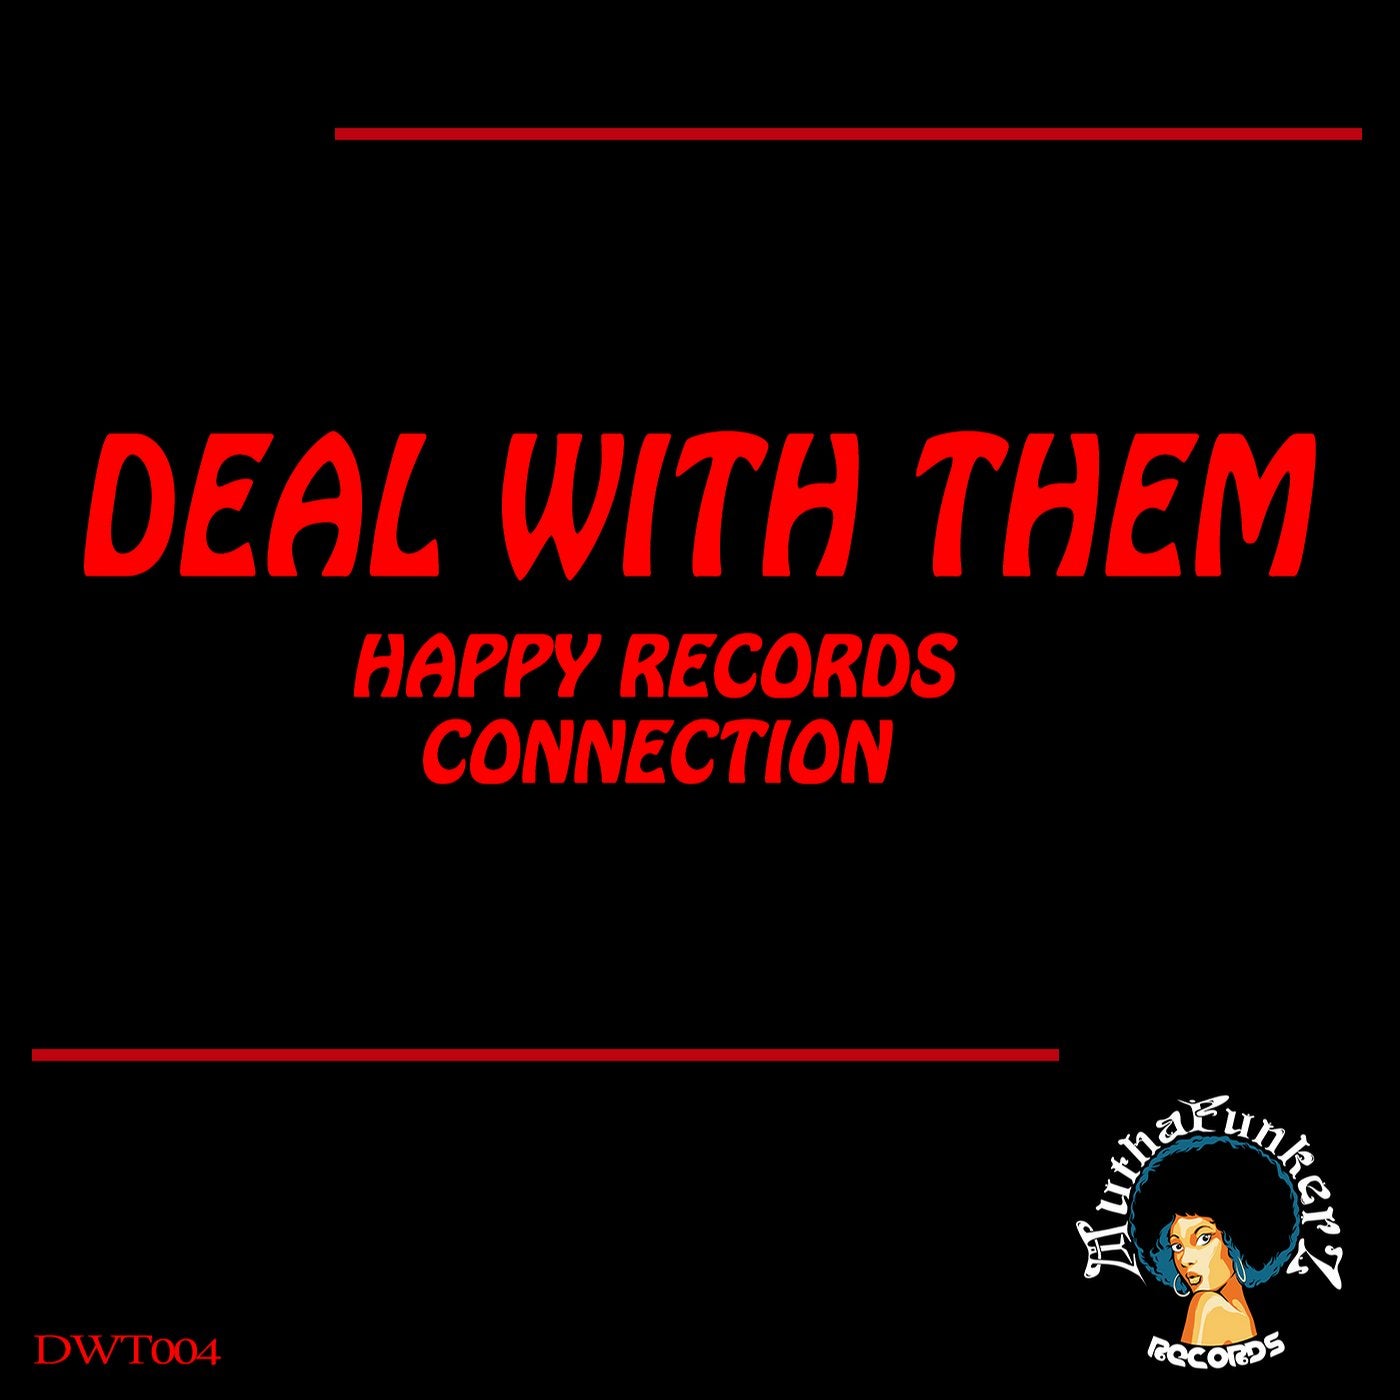 Deal With Them. Happy Records Connection